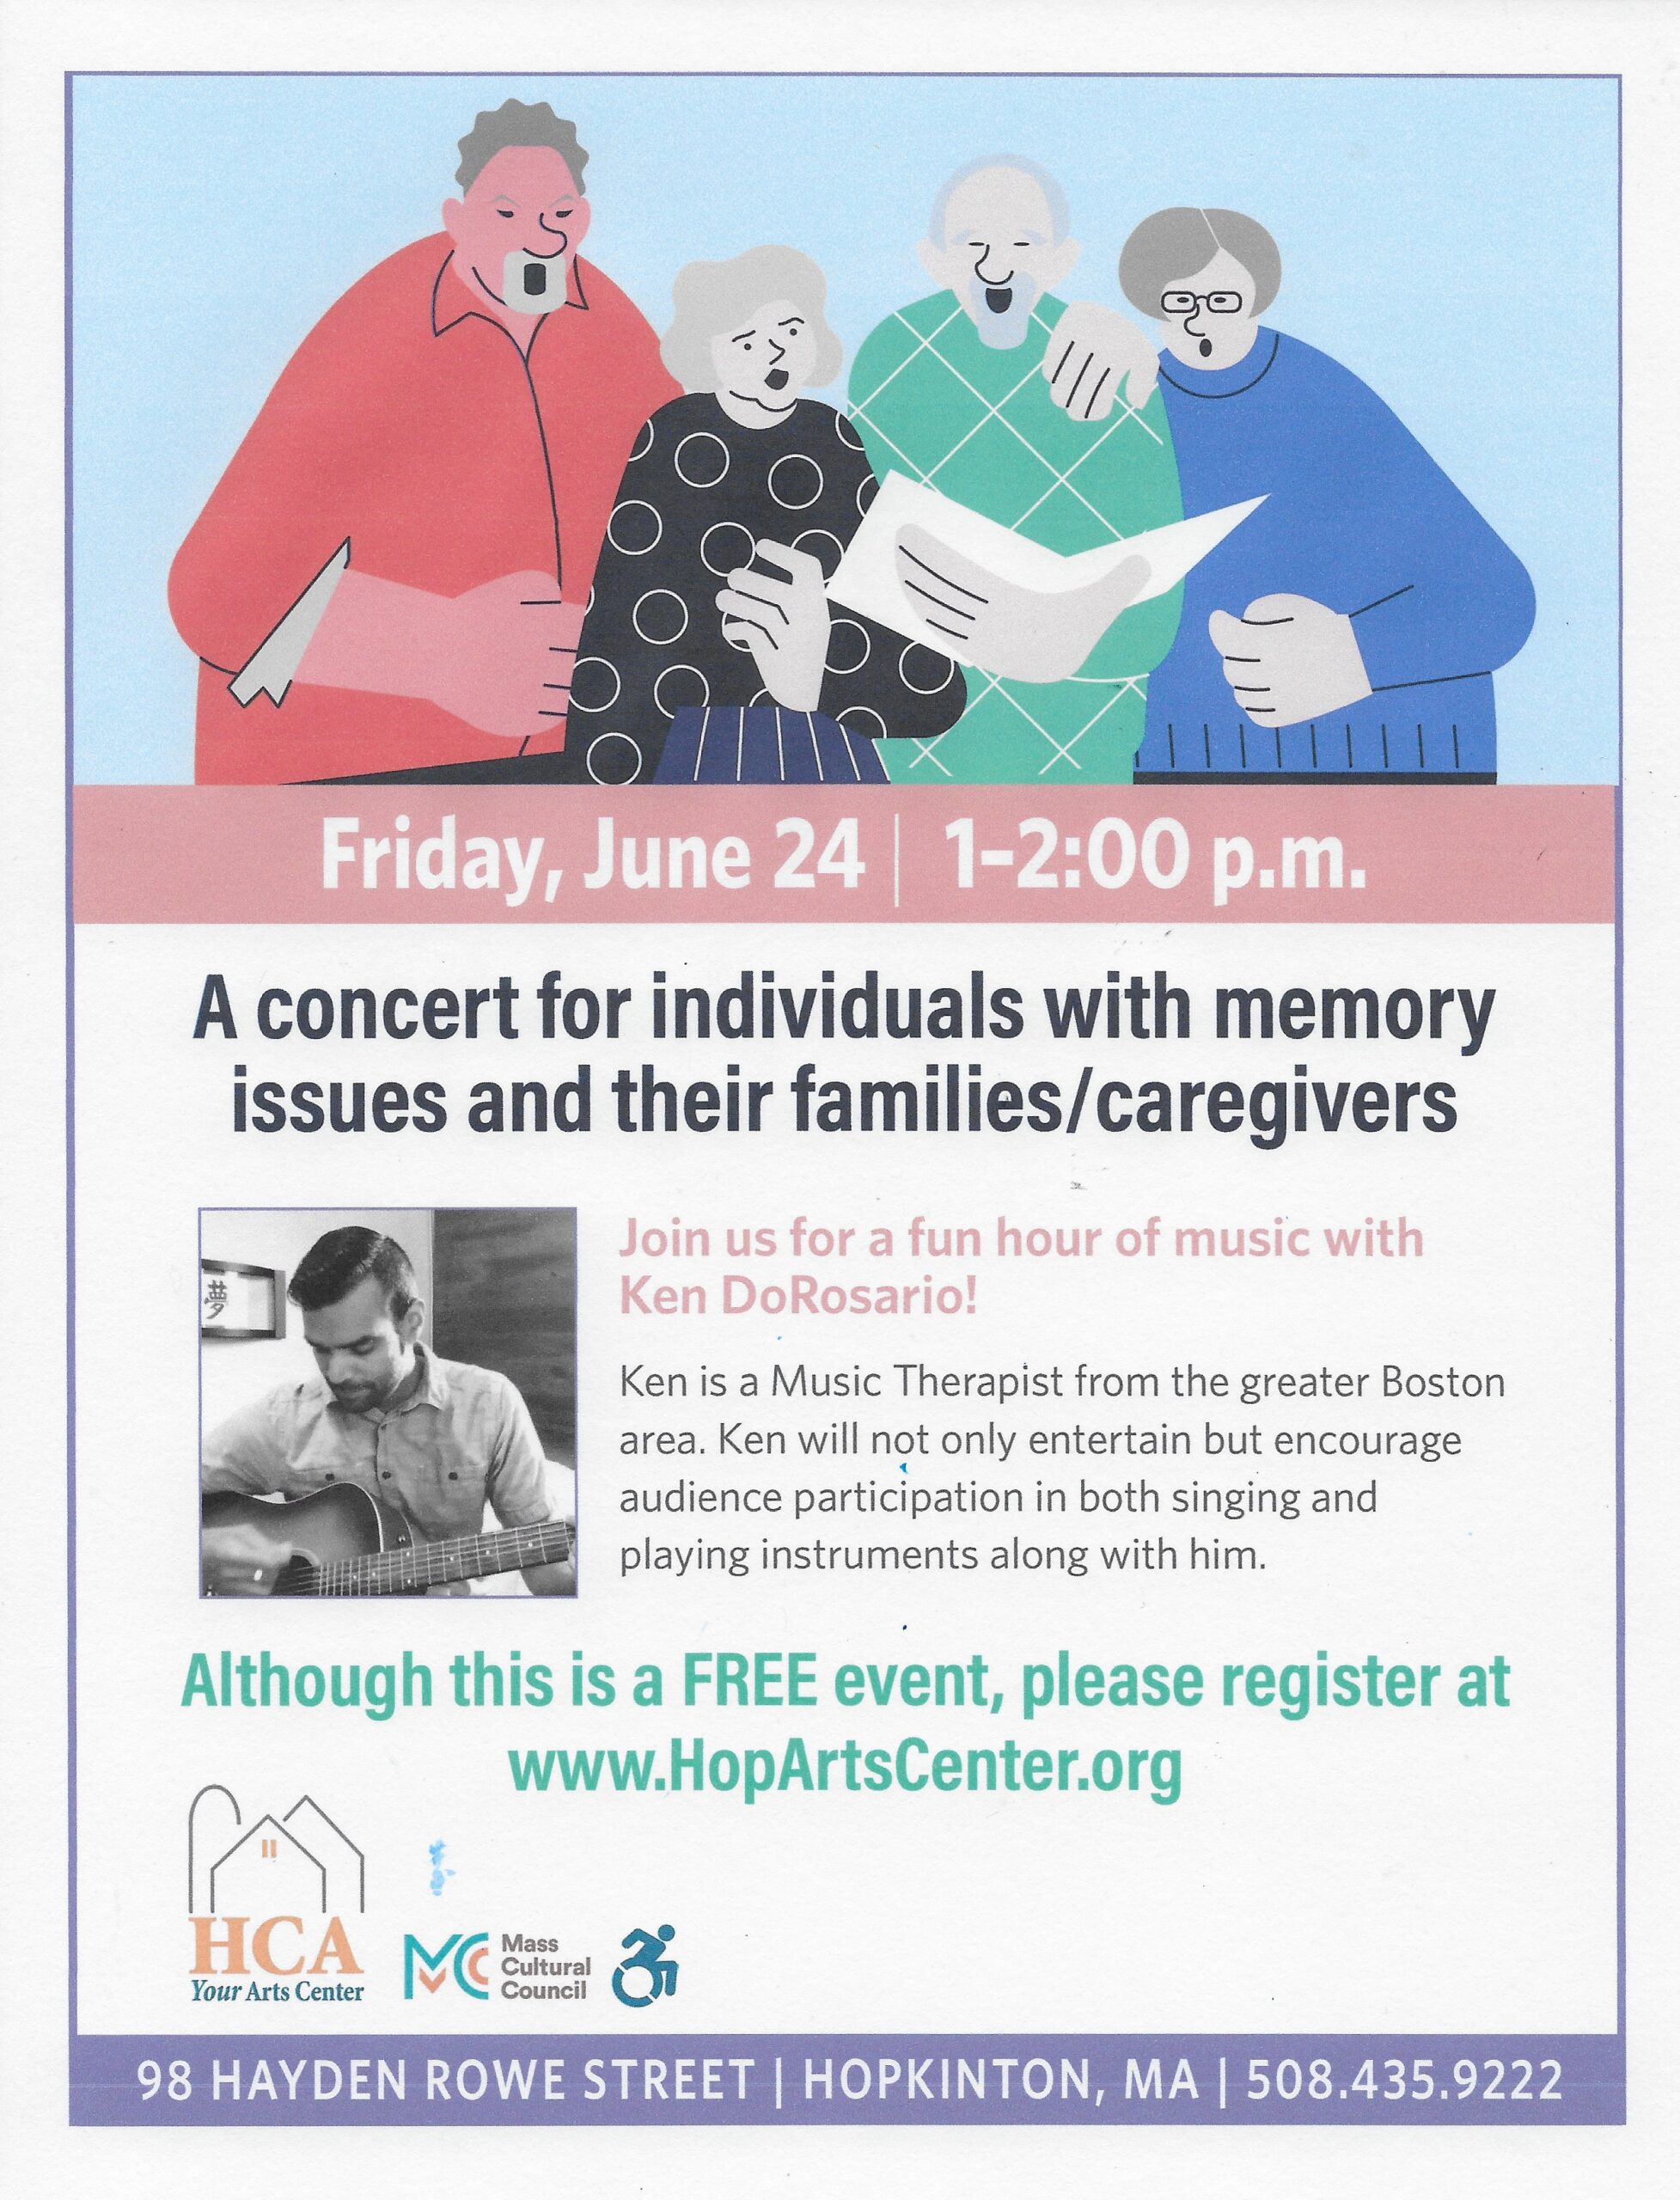 HCA hosts June 24 concert for individuals with memory issues